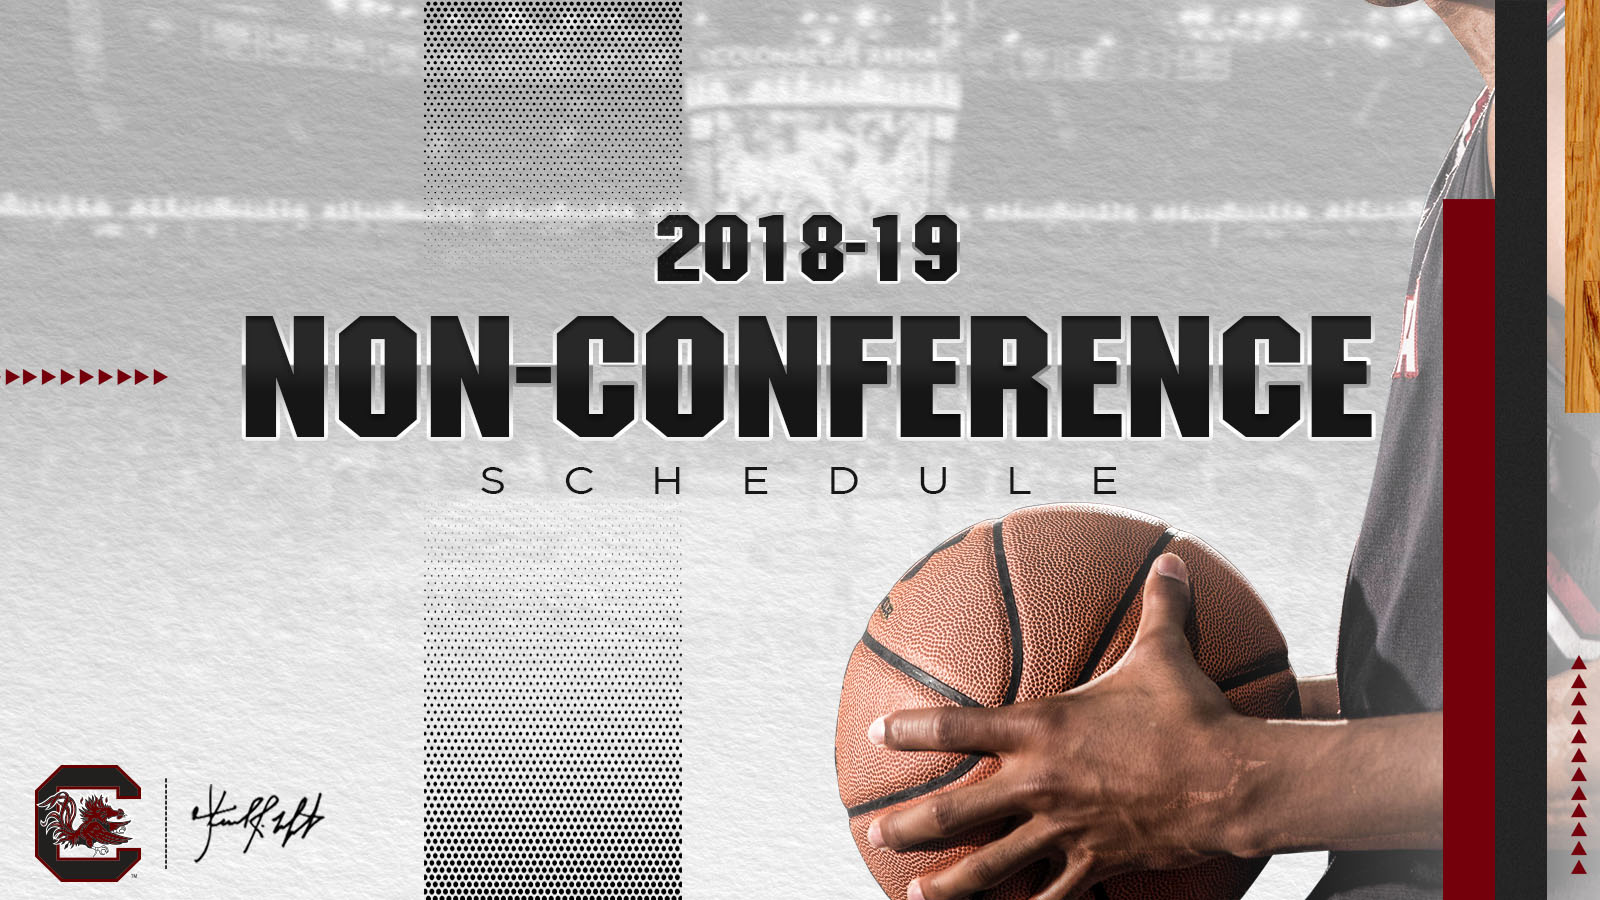 Gamecocks Announce 2018-19 Non-Conference Schedule